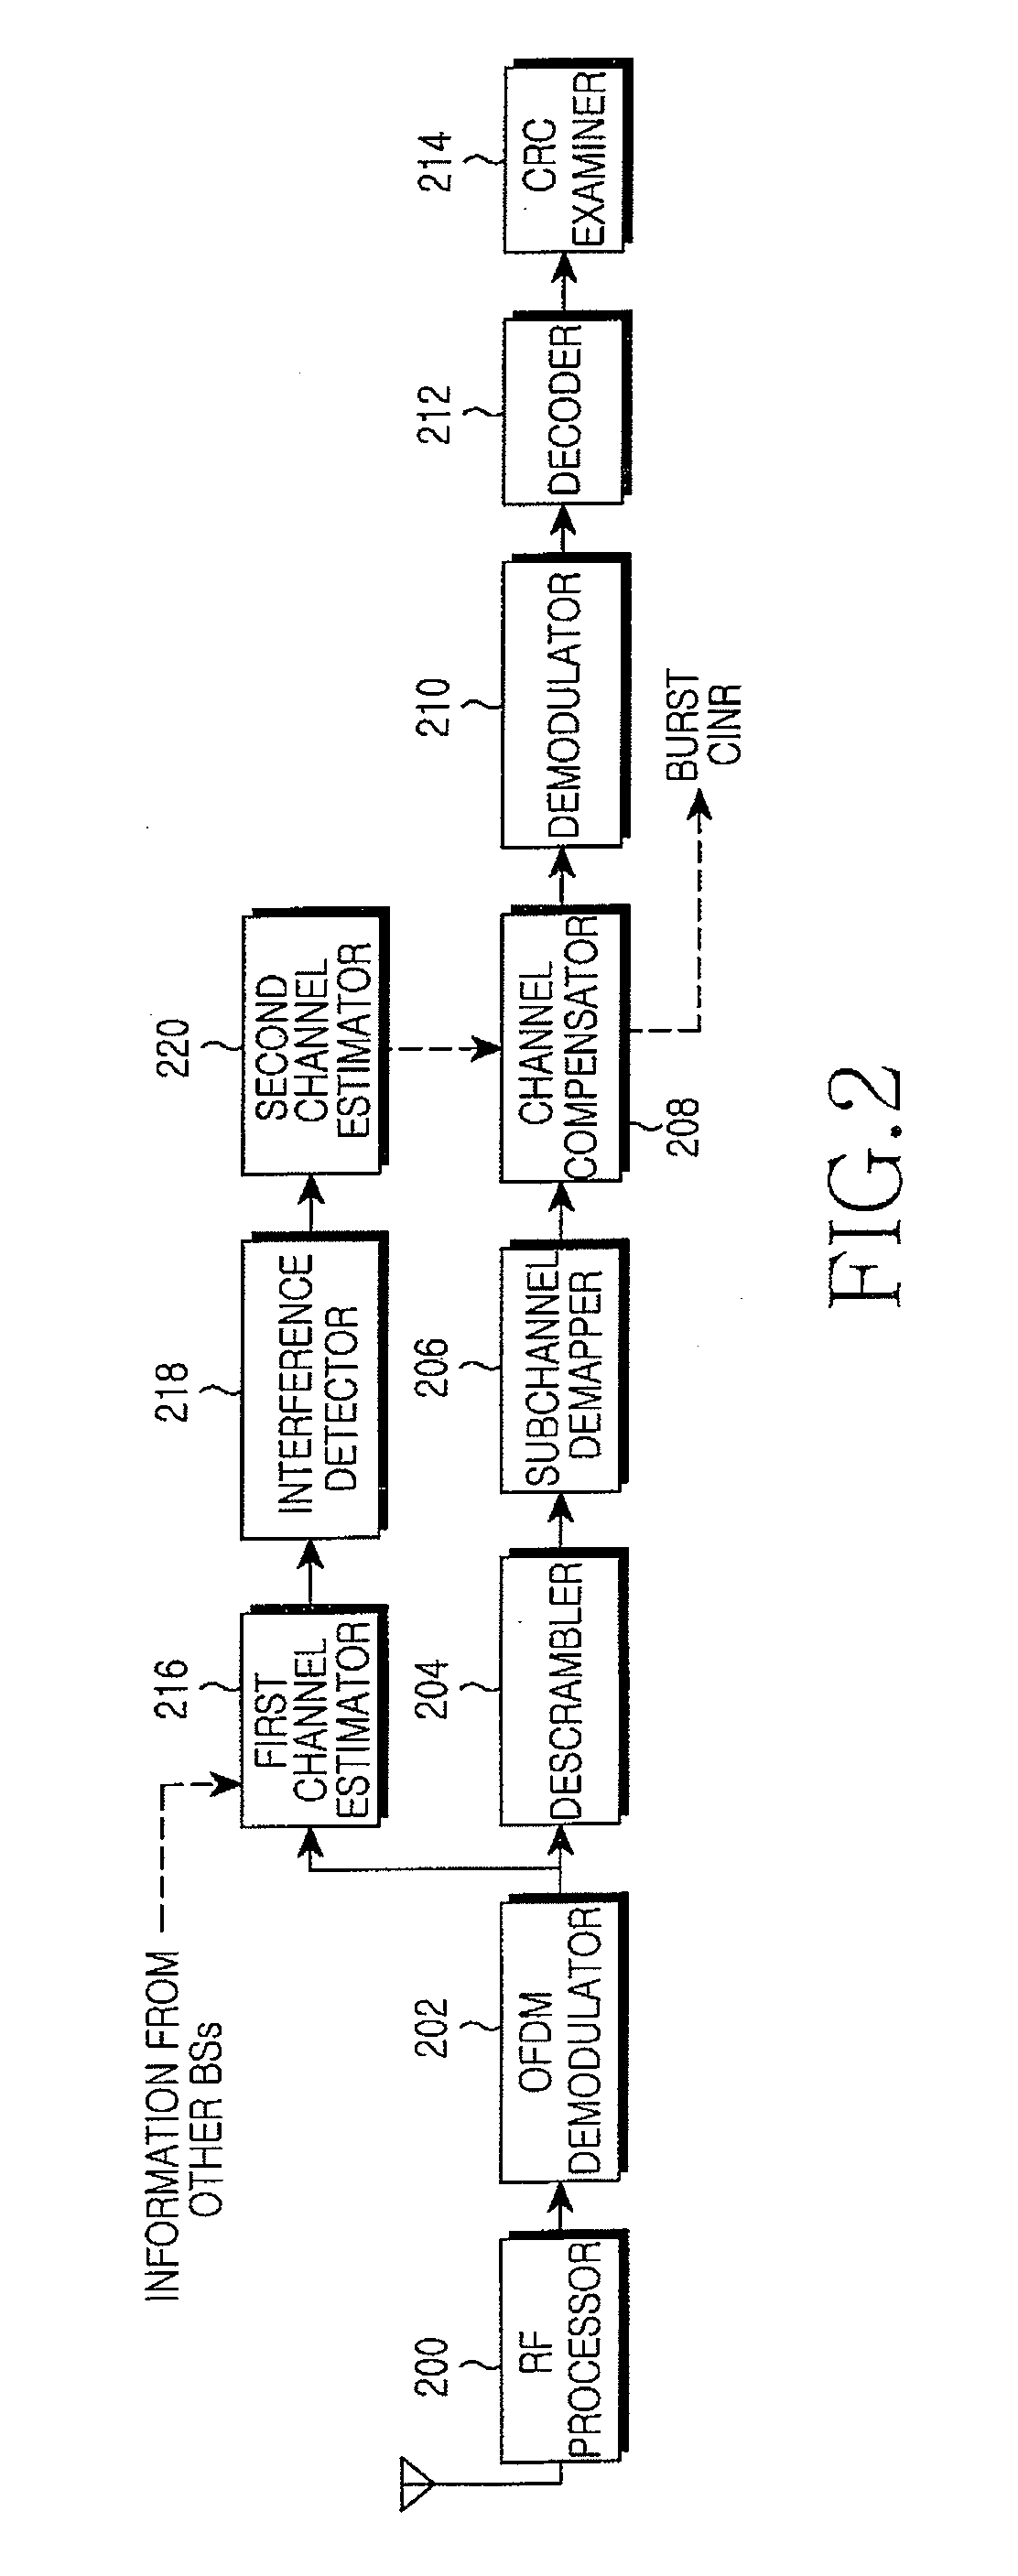 Interference canceling apparatus and method for use in a broadband wireless communication system